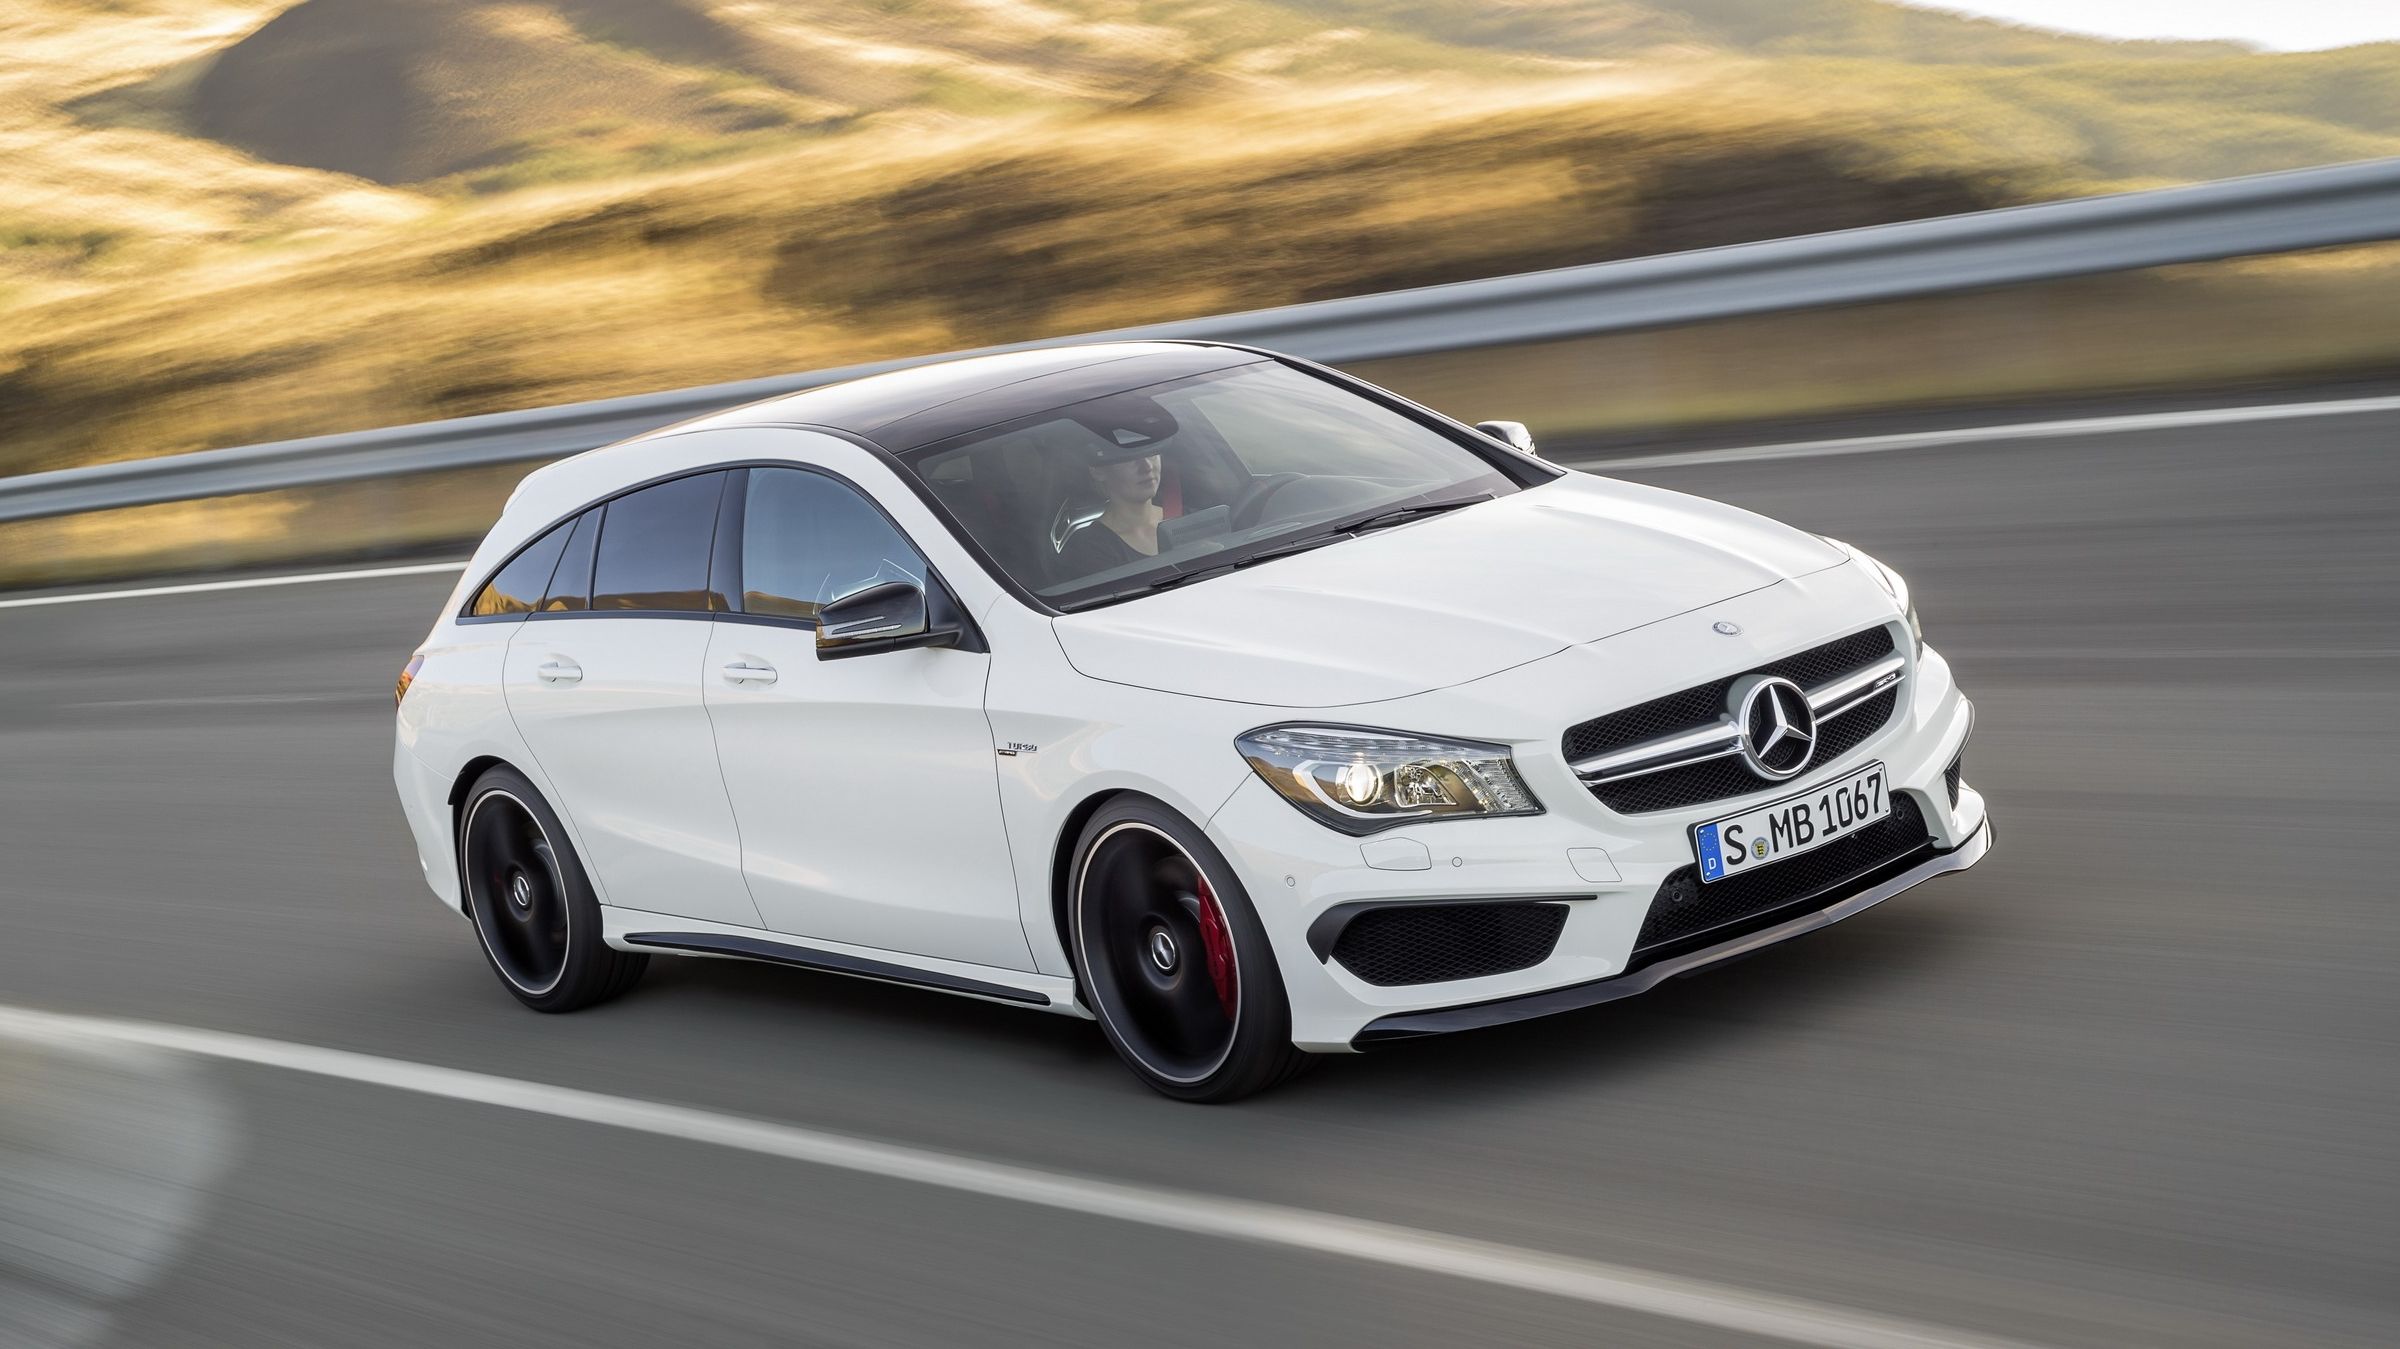  The CLA45 AMG Shooting Brake will be unveiled in Geneva in 2915, and Mercedes has revealed its preliminary information today. 